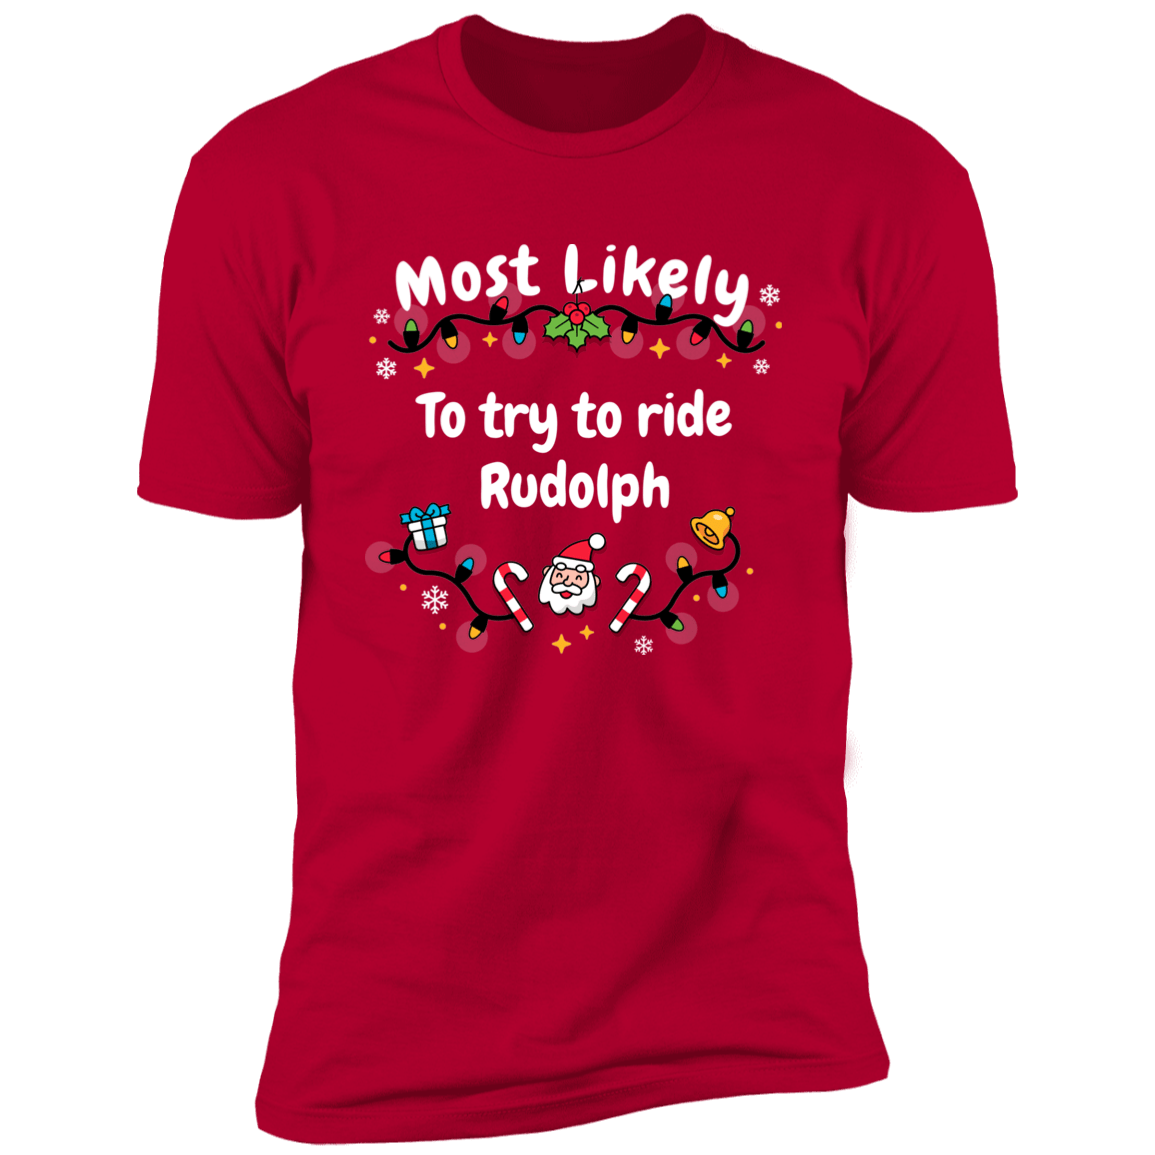 Most Likely To try To Ride Rudolph &amp; Rudolph Red Deluxe Unisex Tees